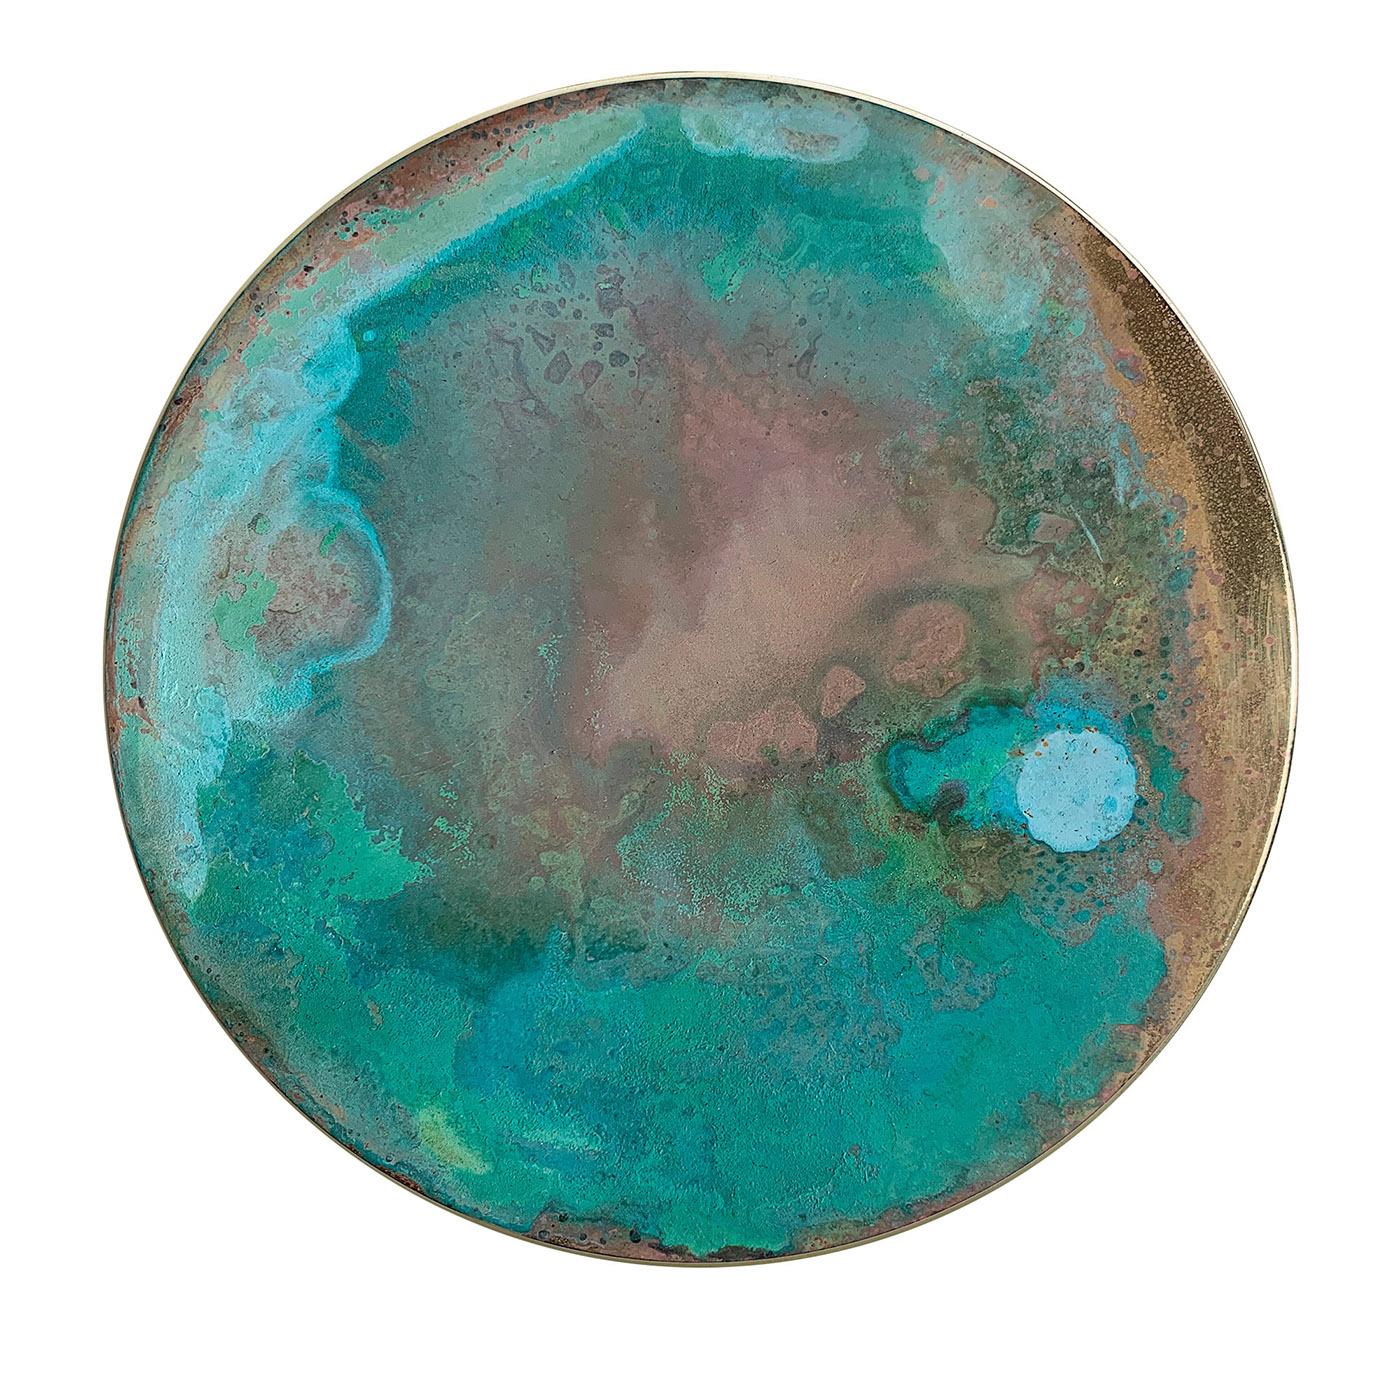 This decorative disk is handcrafted of brass and treated with oxides and acids to create mesmerizing traceries and hues belonging to the Aurora Collection. The interaction of the acids lends it its characteristic corroded look. Signed by the artist